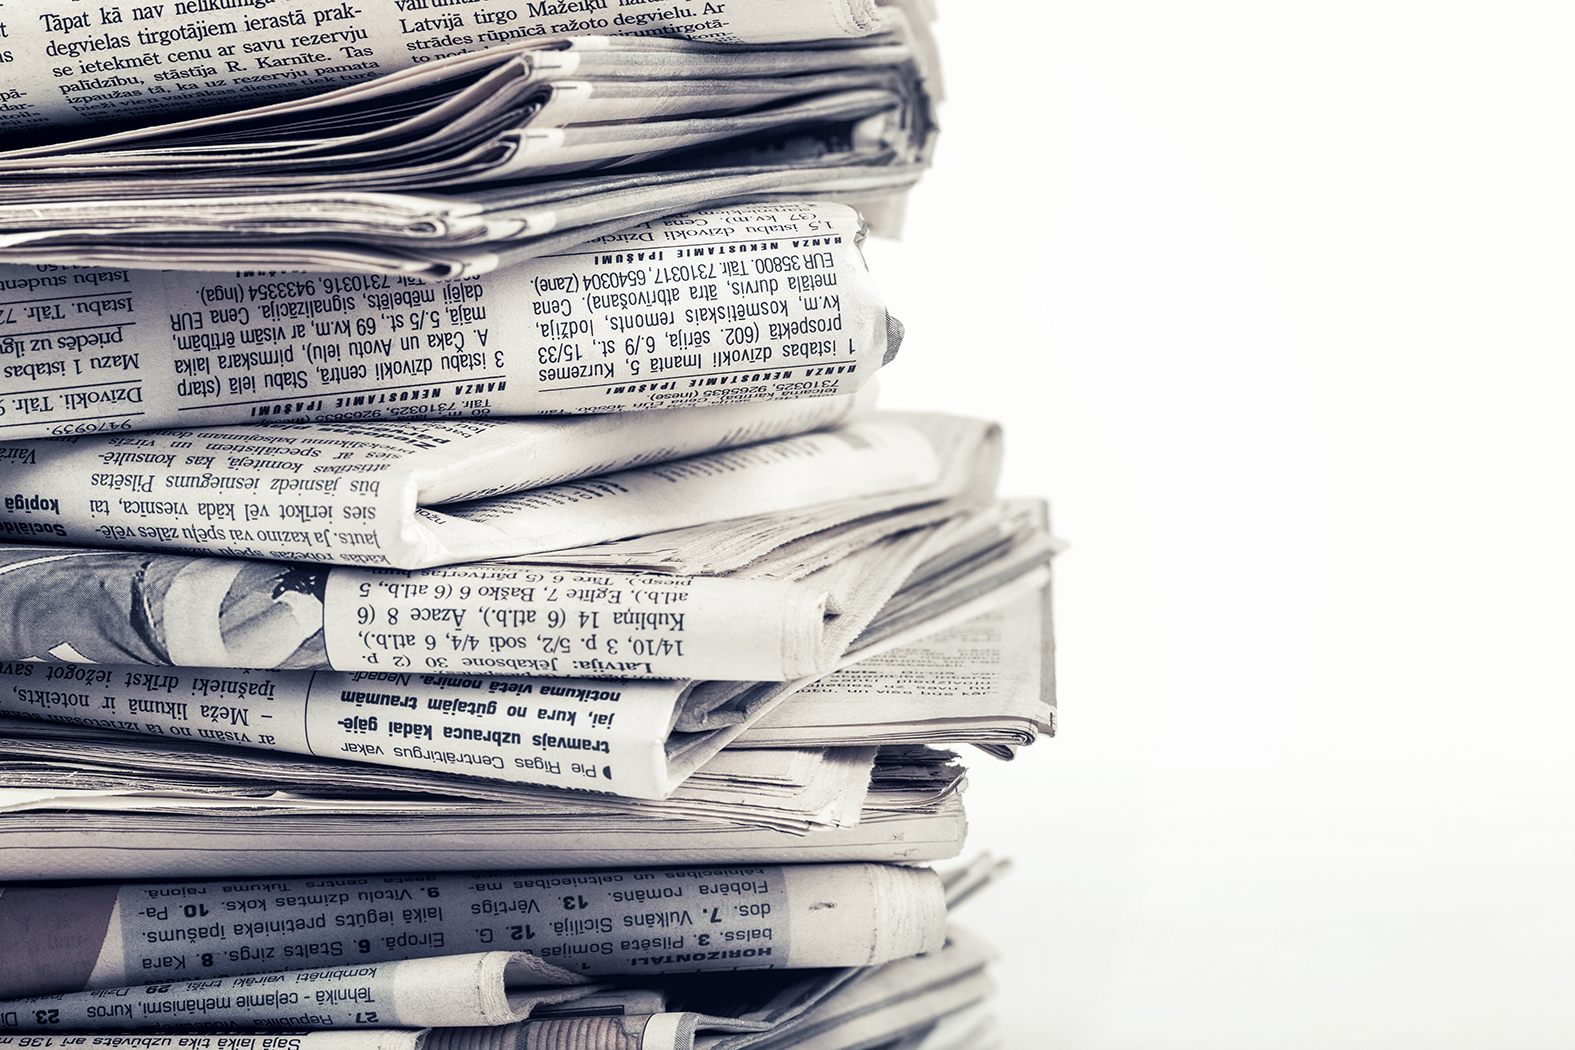 closeup stack of the newspaper